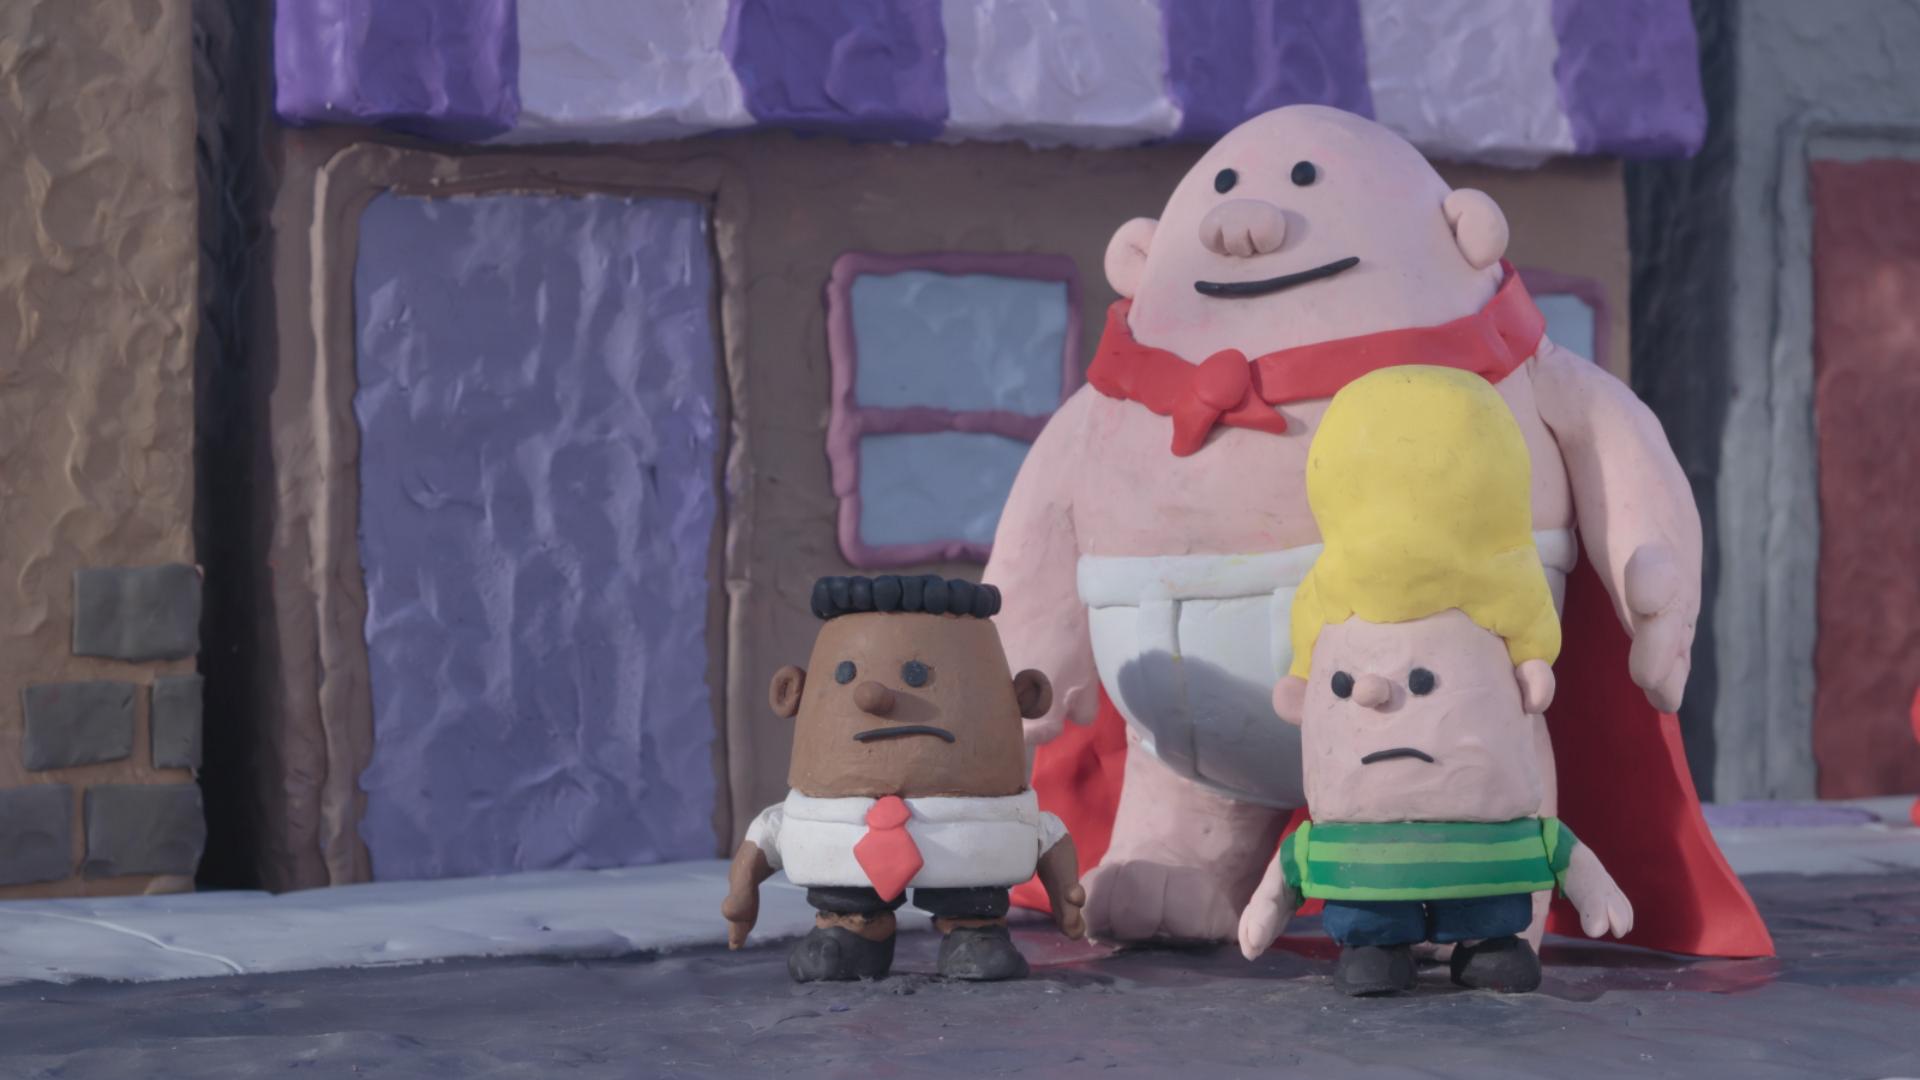 Captain Underpants Netflix Series Clip Plays with Animation Styles